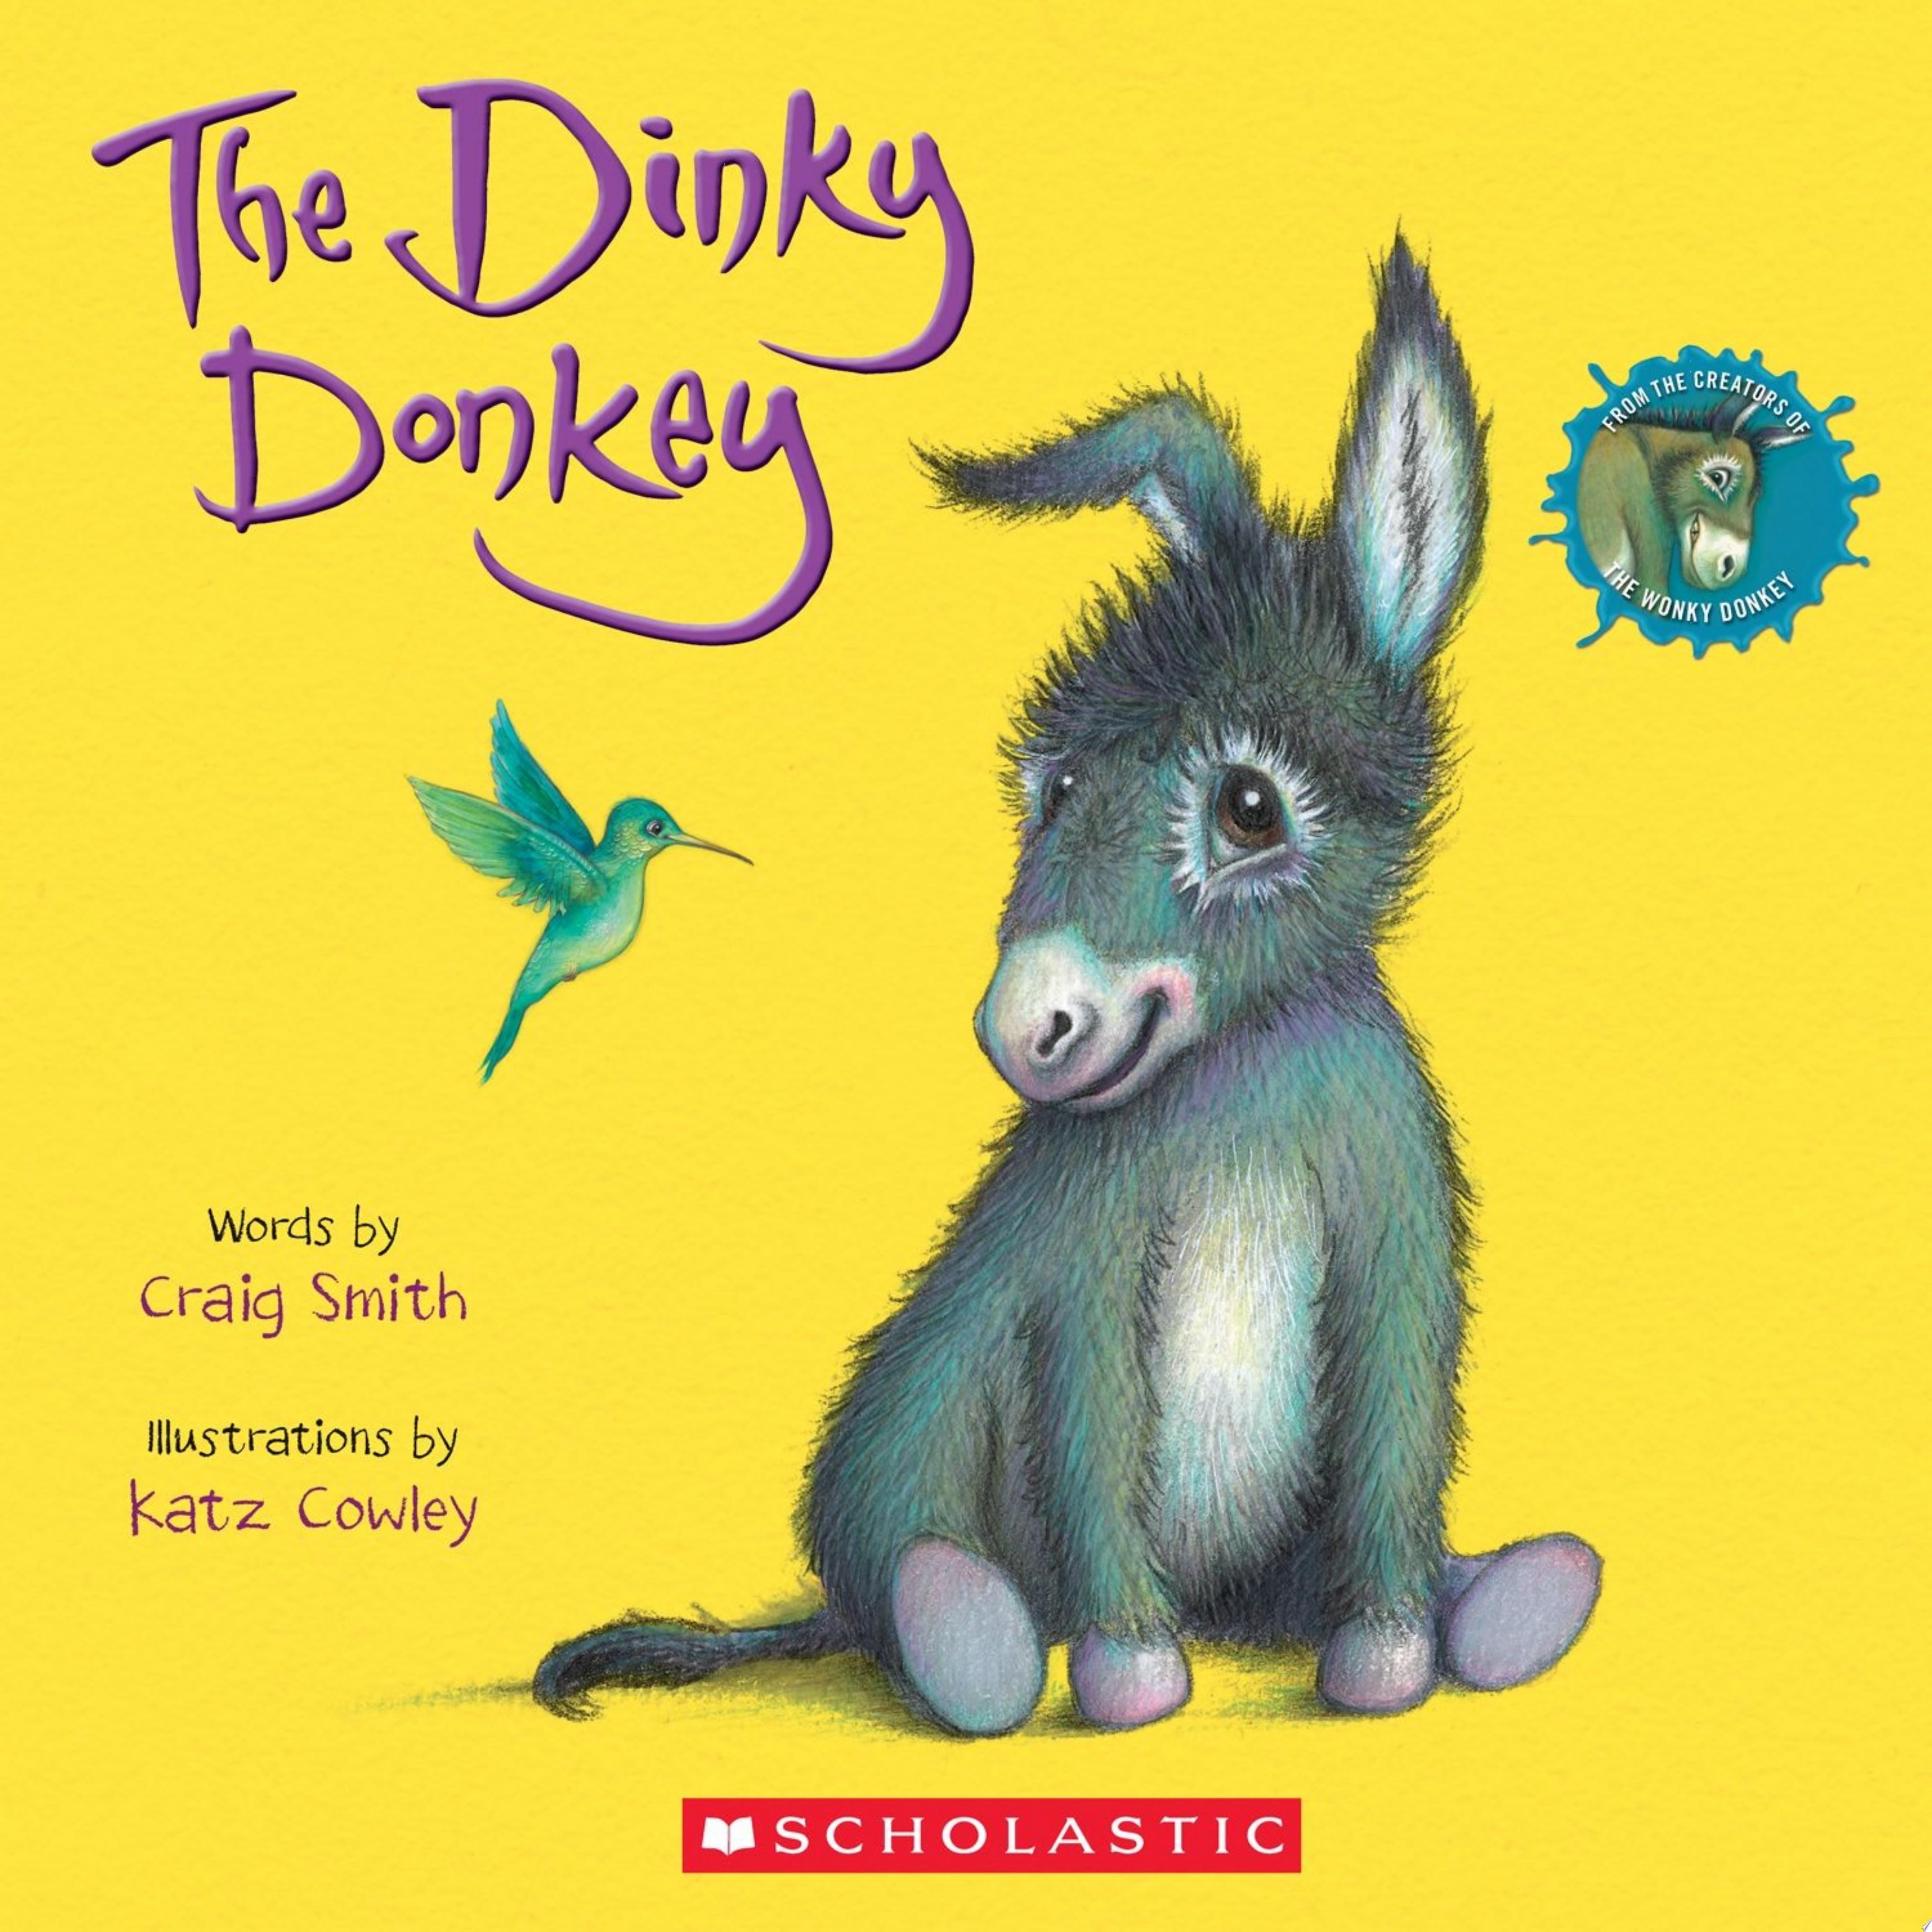 Image for "The Dinky Donkey"